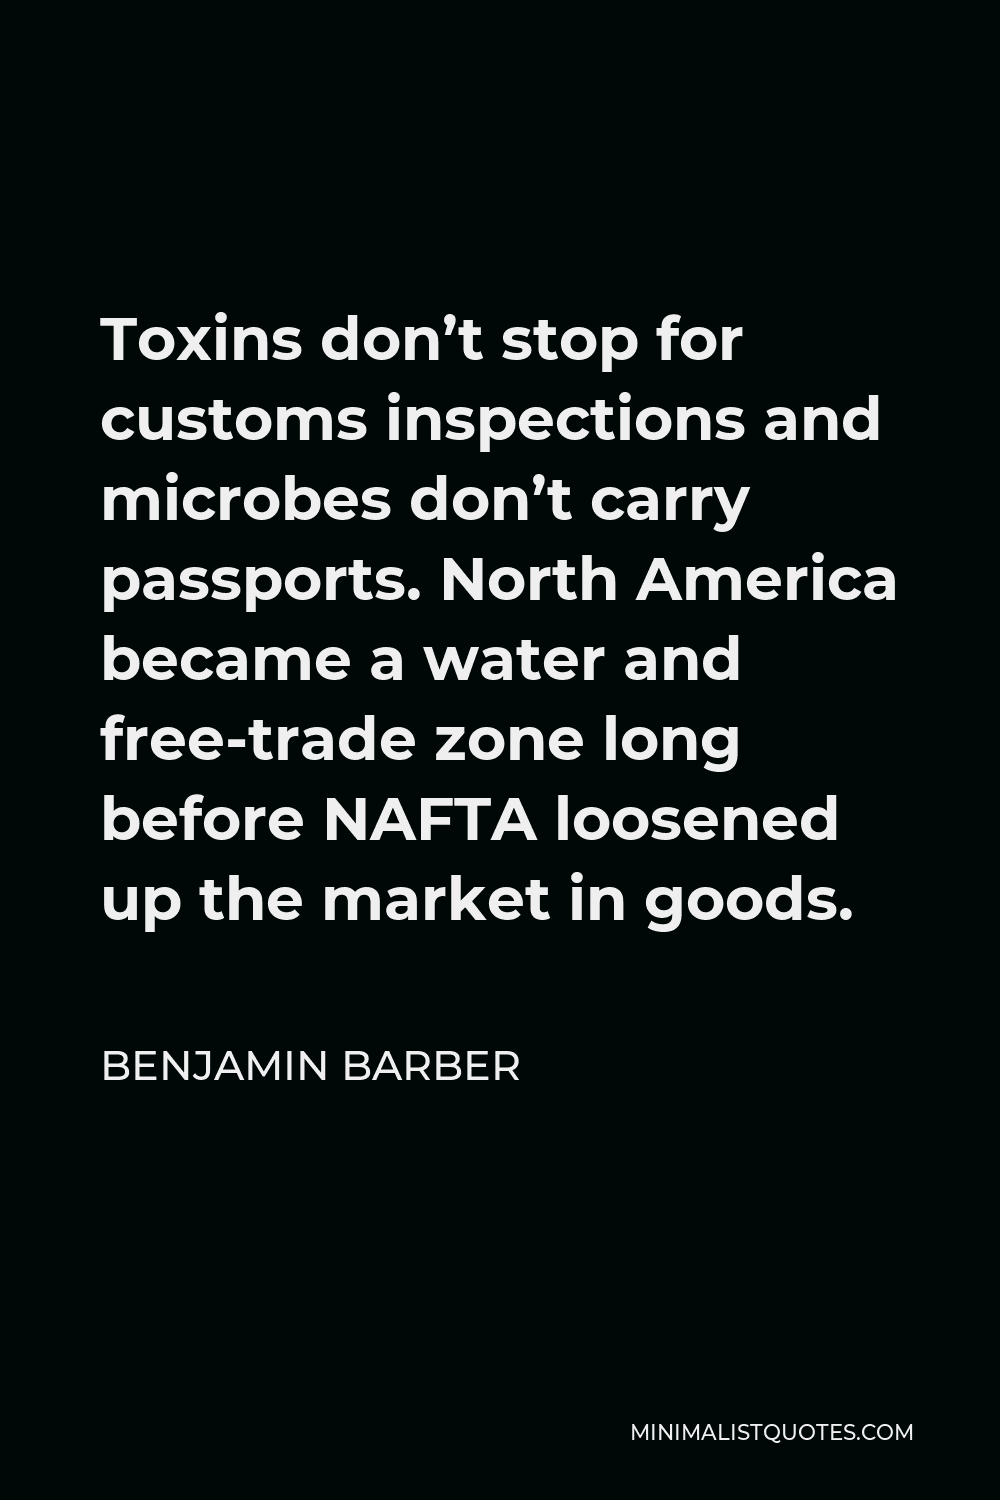 Benjamin Barber Quote - Toxins don’t stop for customs inspections and microbes don’t carry passports. North America became a water and free-trade zone long before NAFTA loosened up the market in goods.